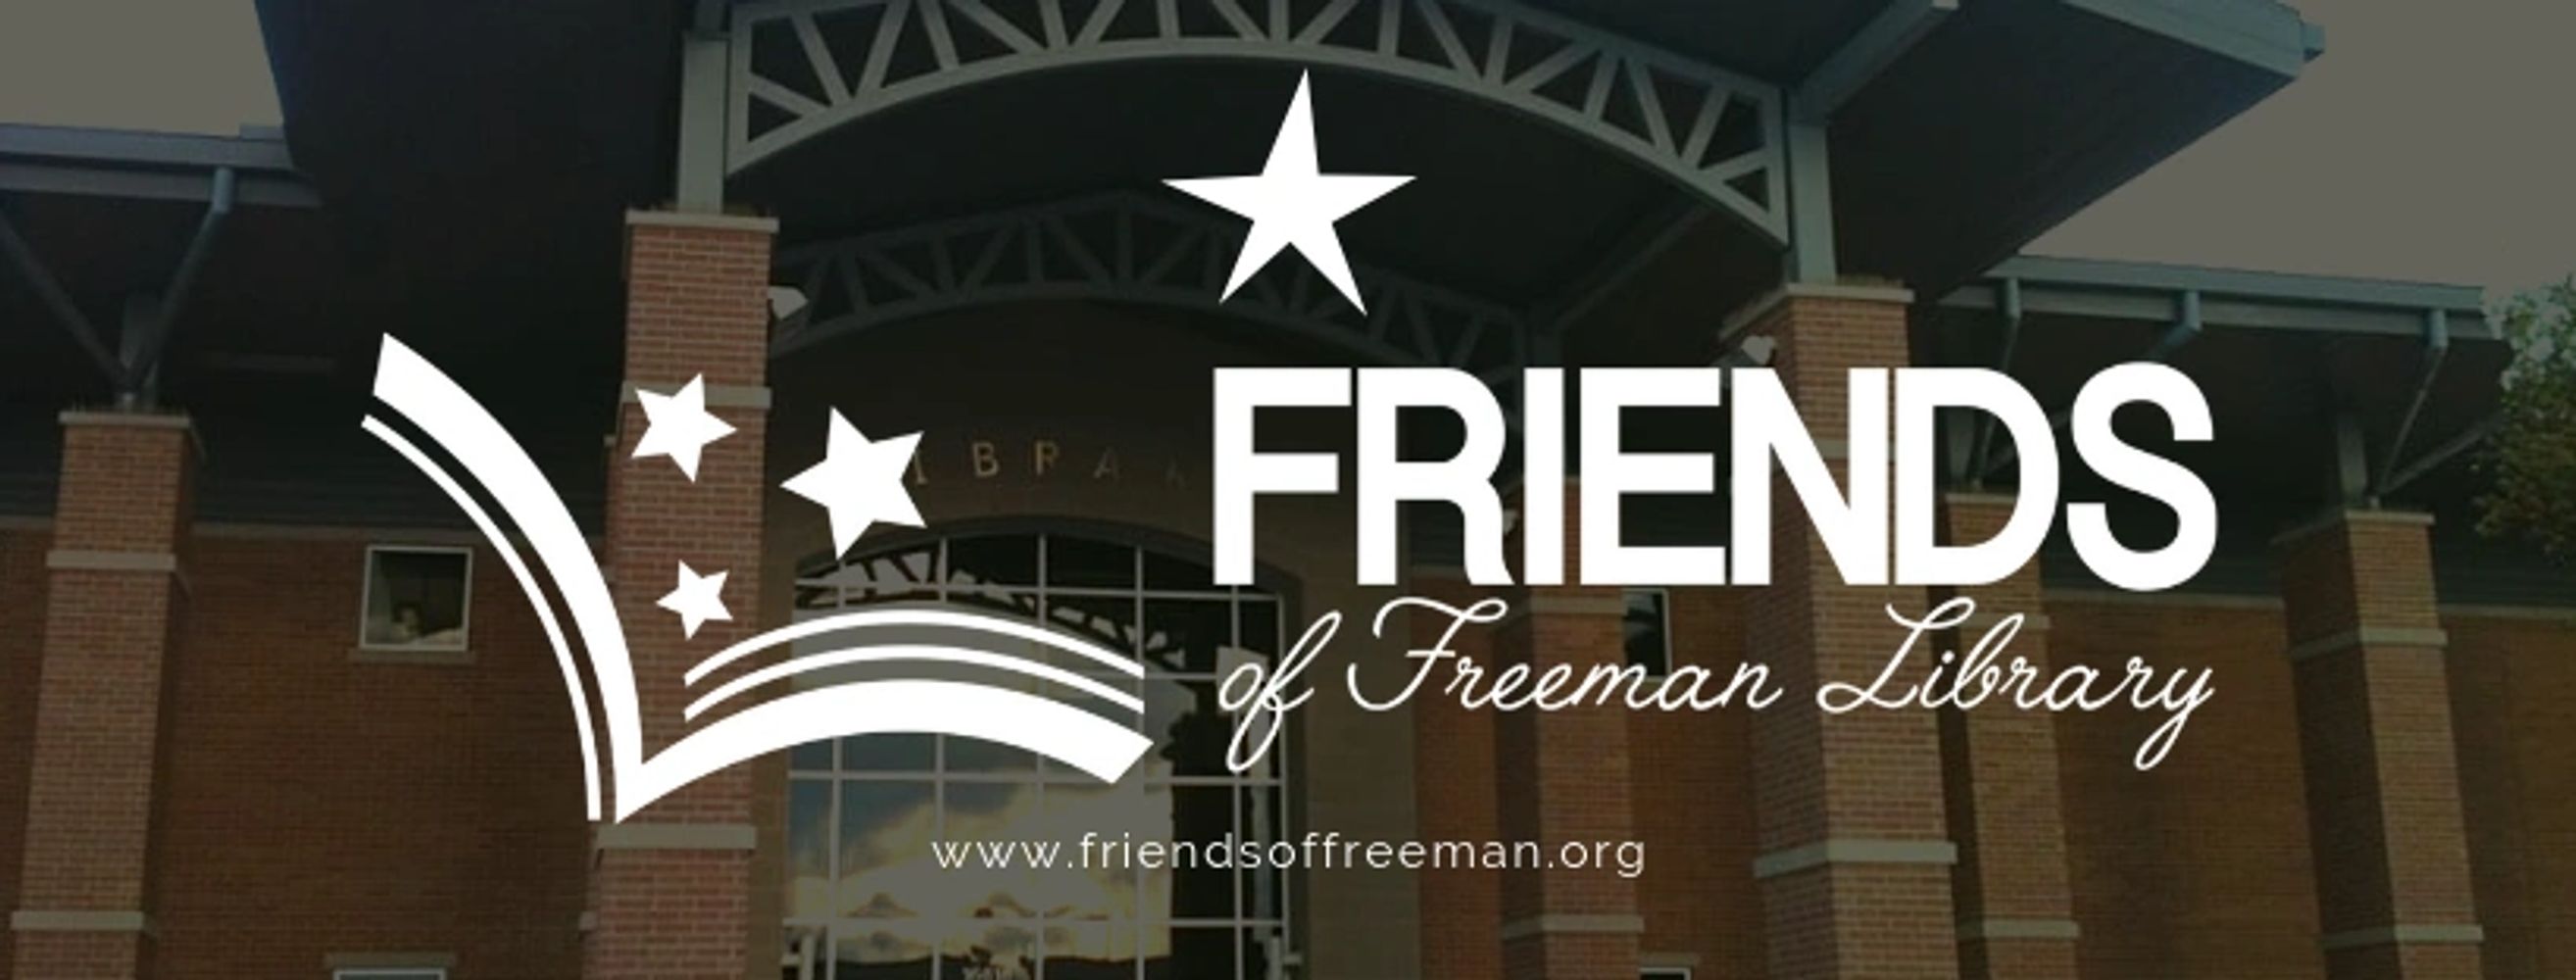 Bookstore - Friends of Freeman Library